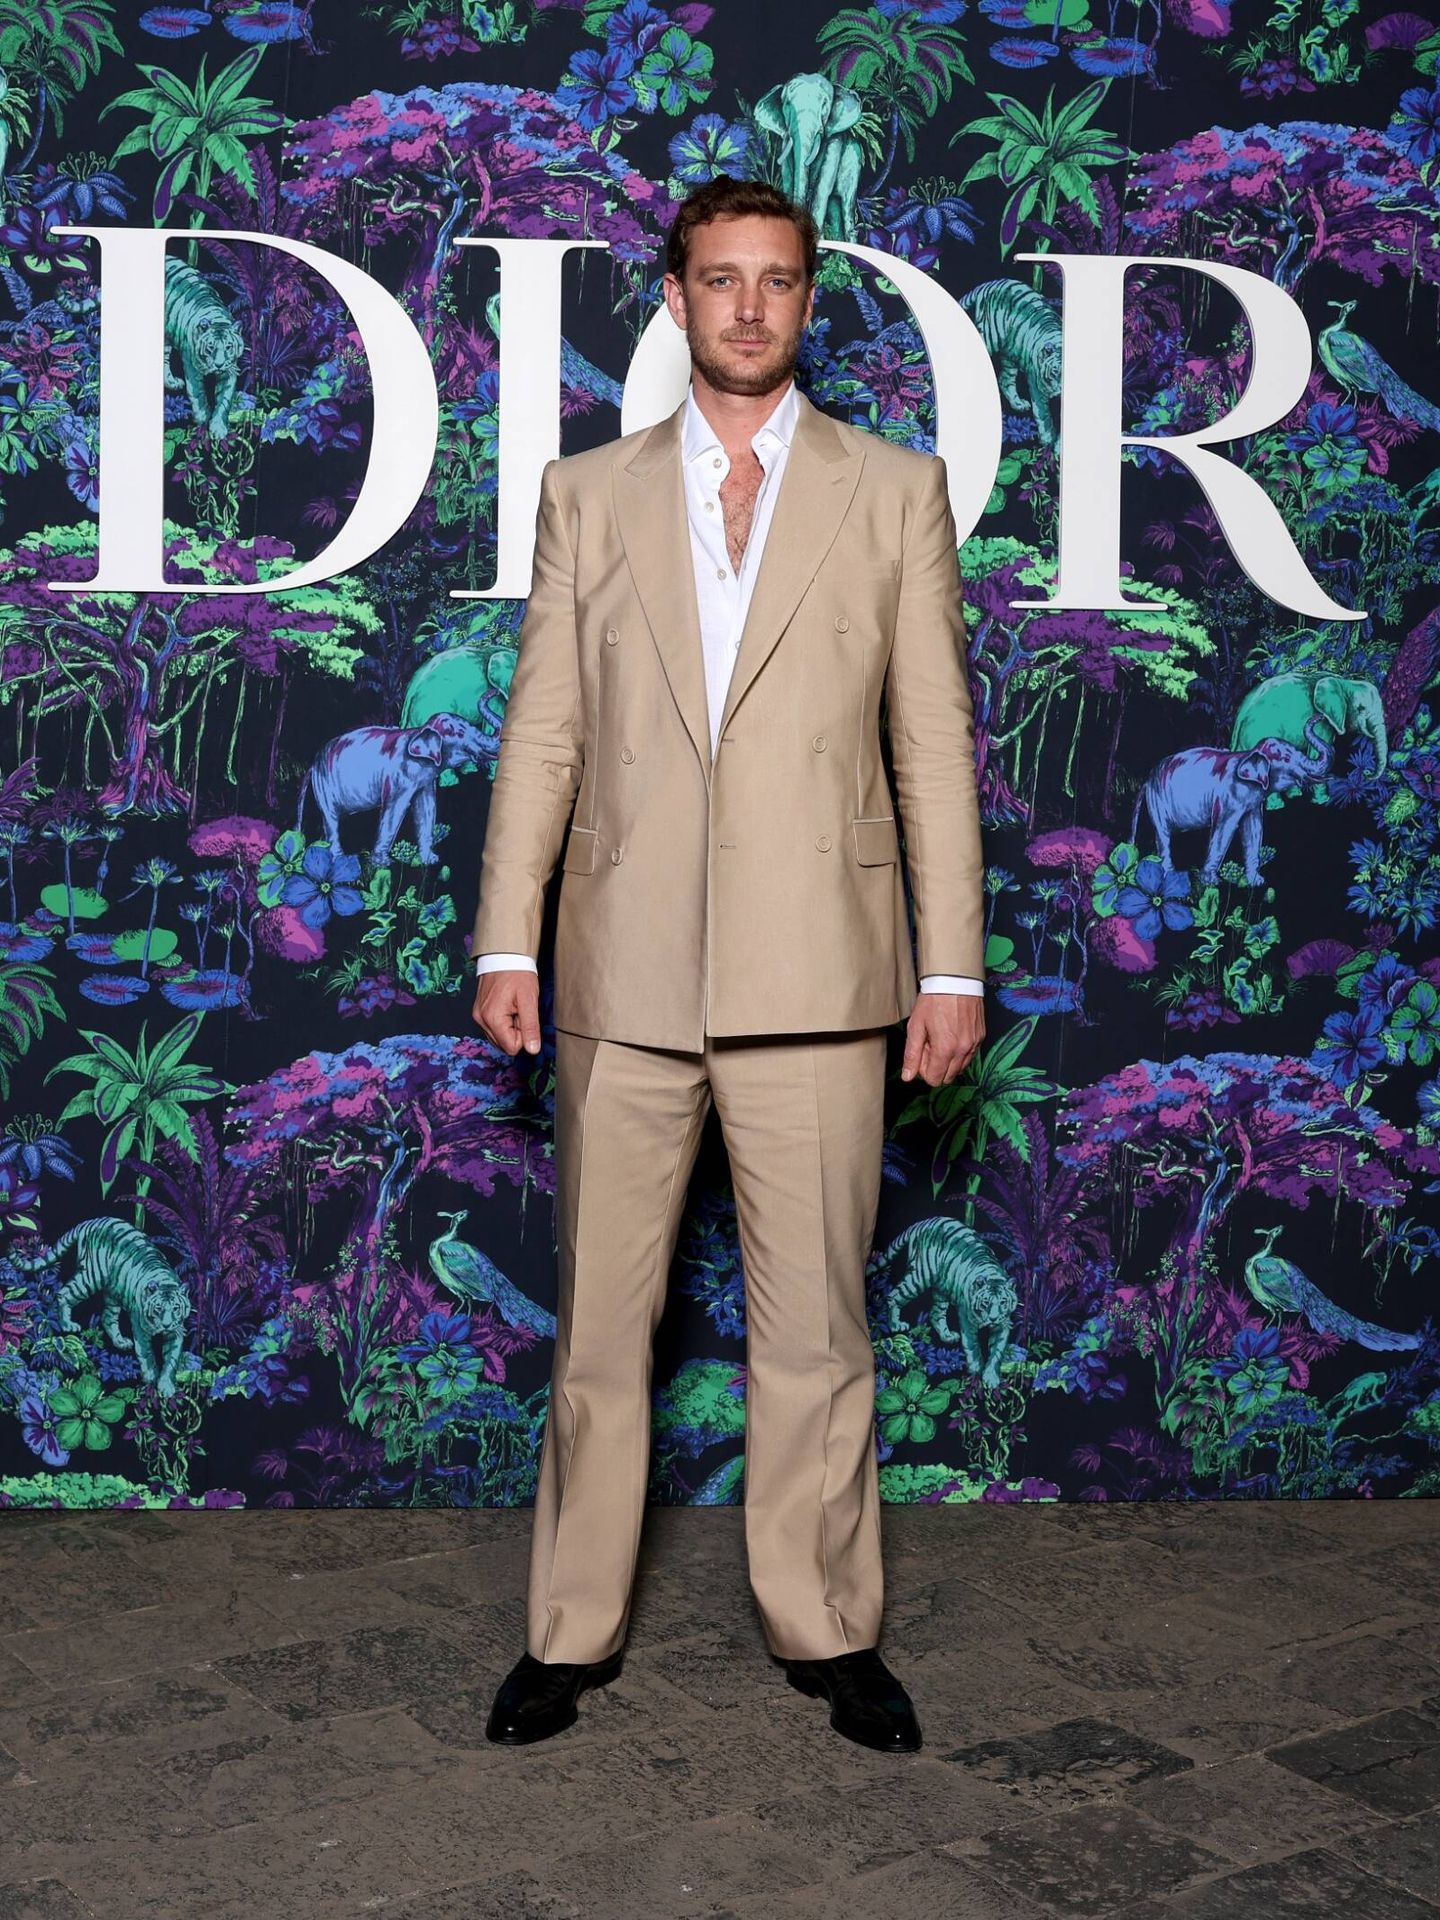 Pierre Casiraghi. (Getty Images)